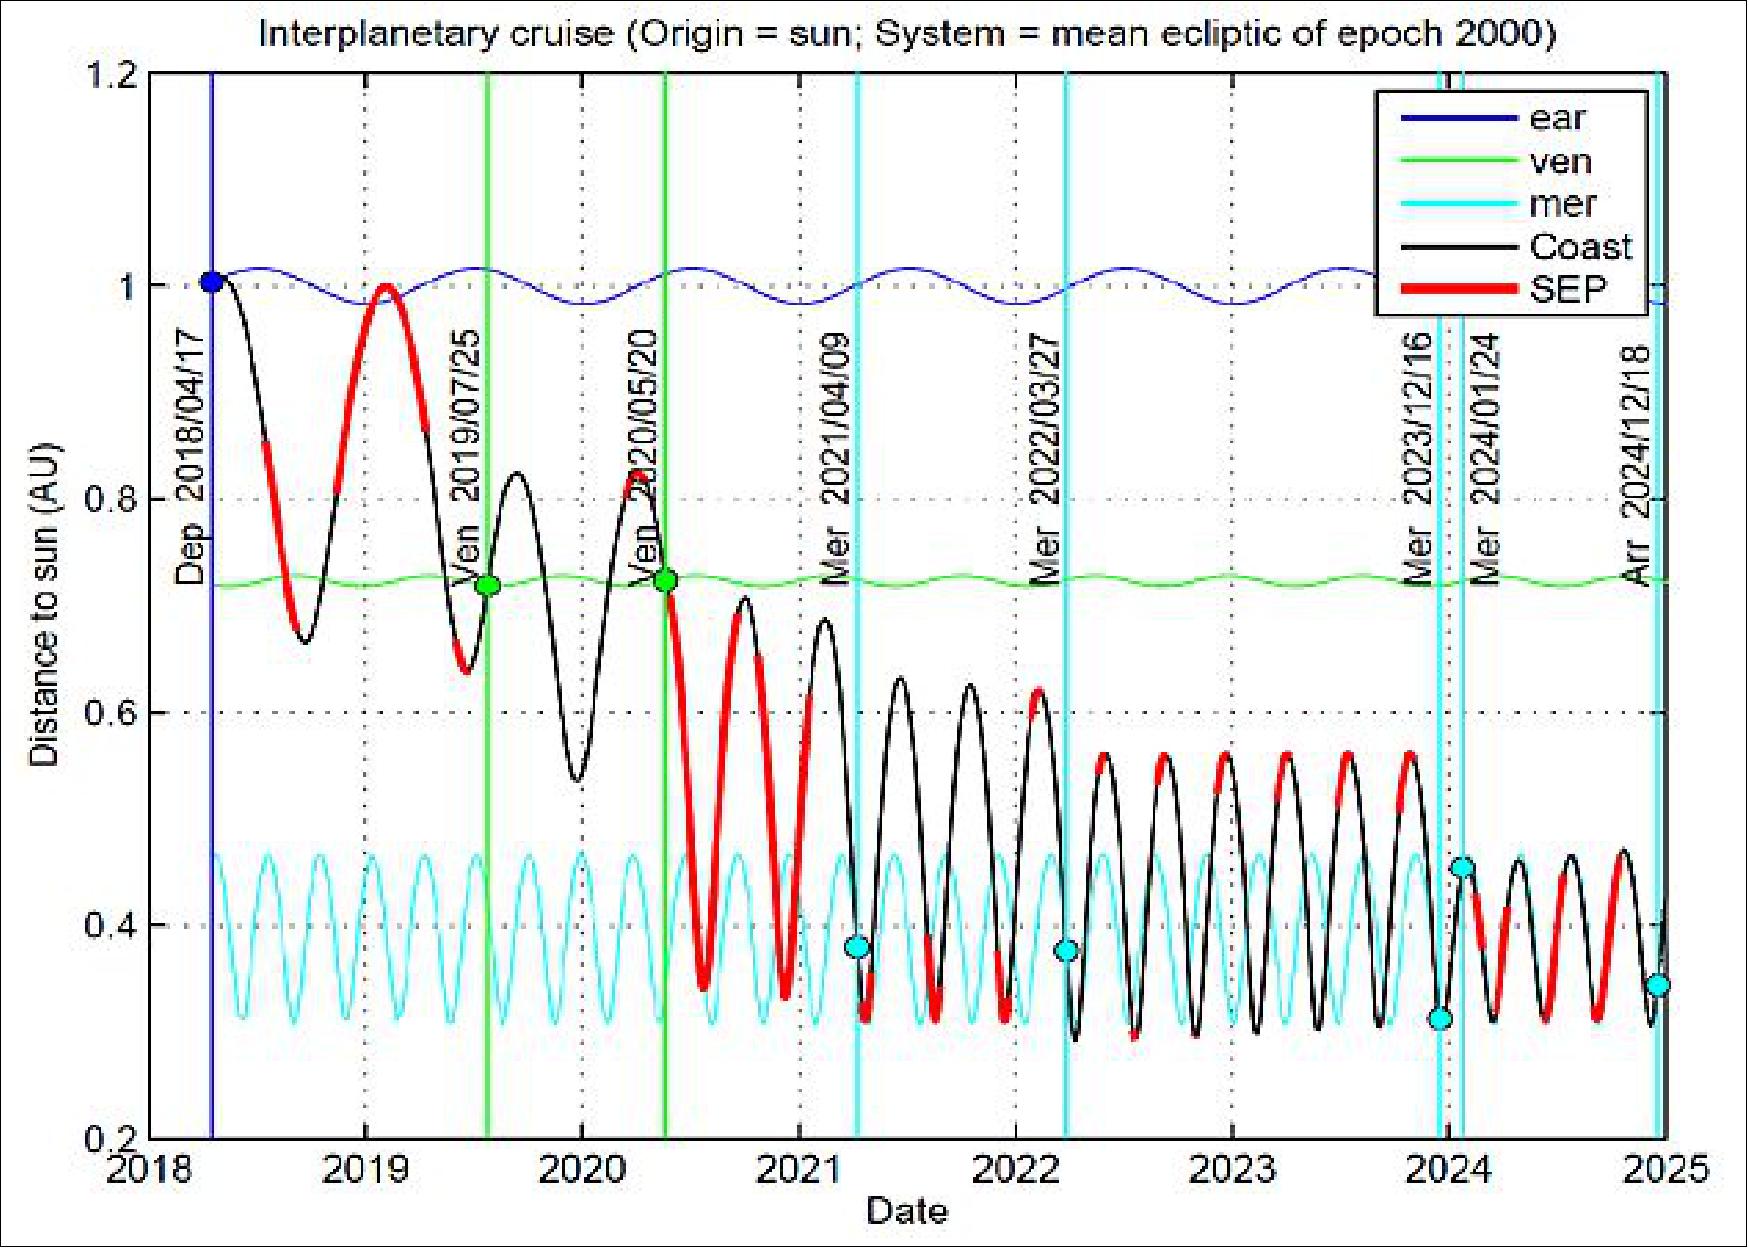 Figure 13: Cruise trajectory for April 2018 launch, showing the sun distance, SEP (Solar Electric Propulsion) usage, and planetary flybys (image credit: ESA)